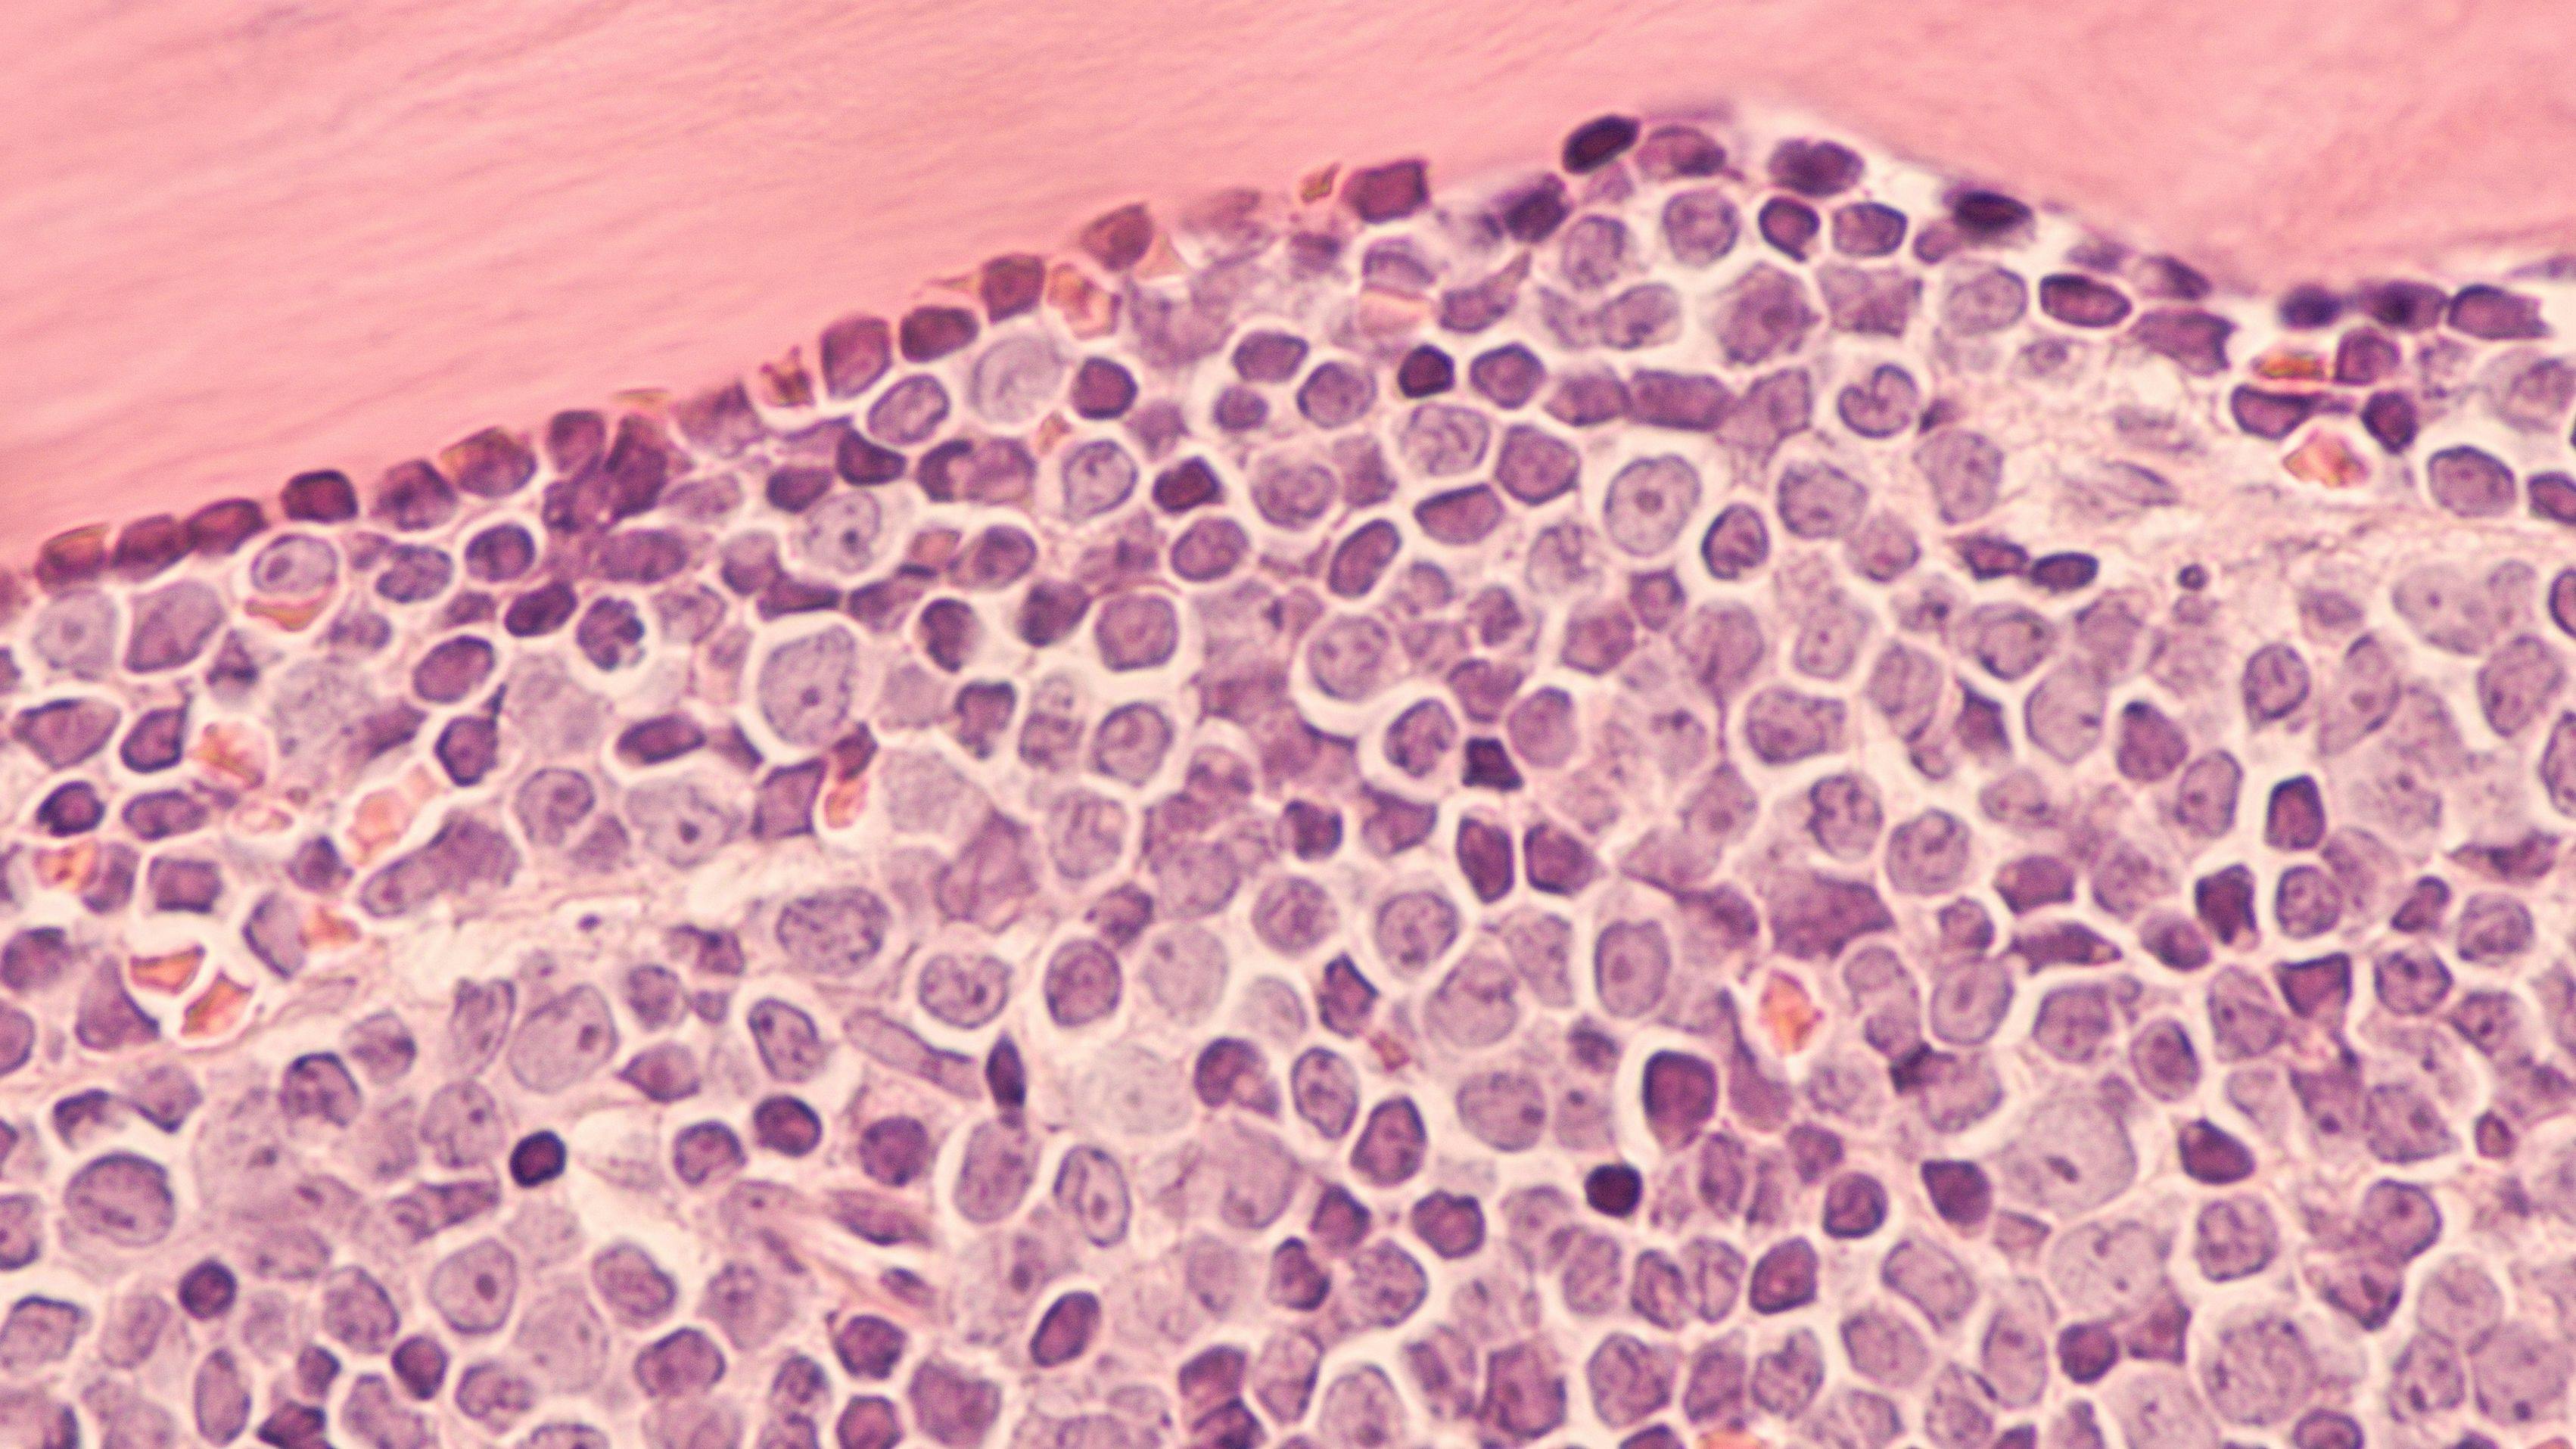 A staging bone marrow biopsy shows replacement of normal elements by diffuse large B-cell lymphoma.